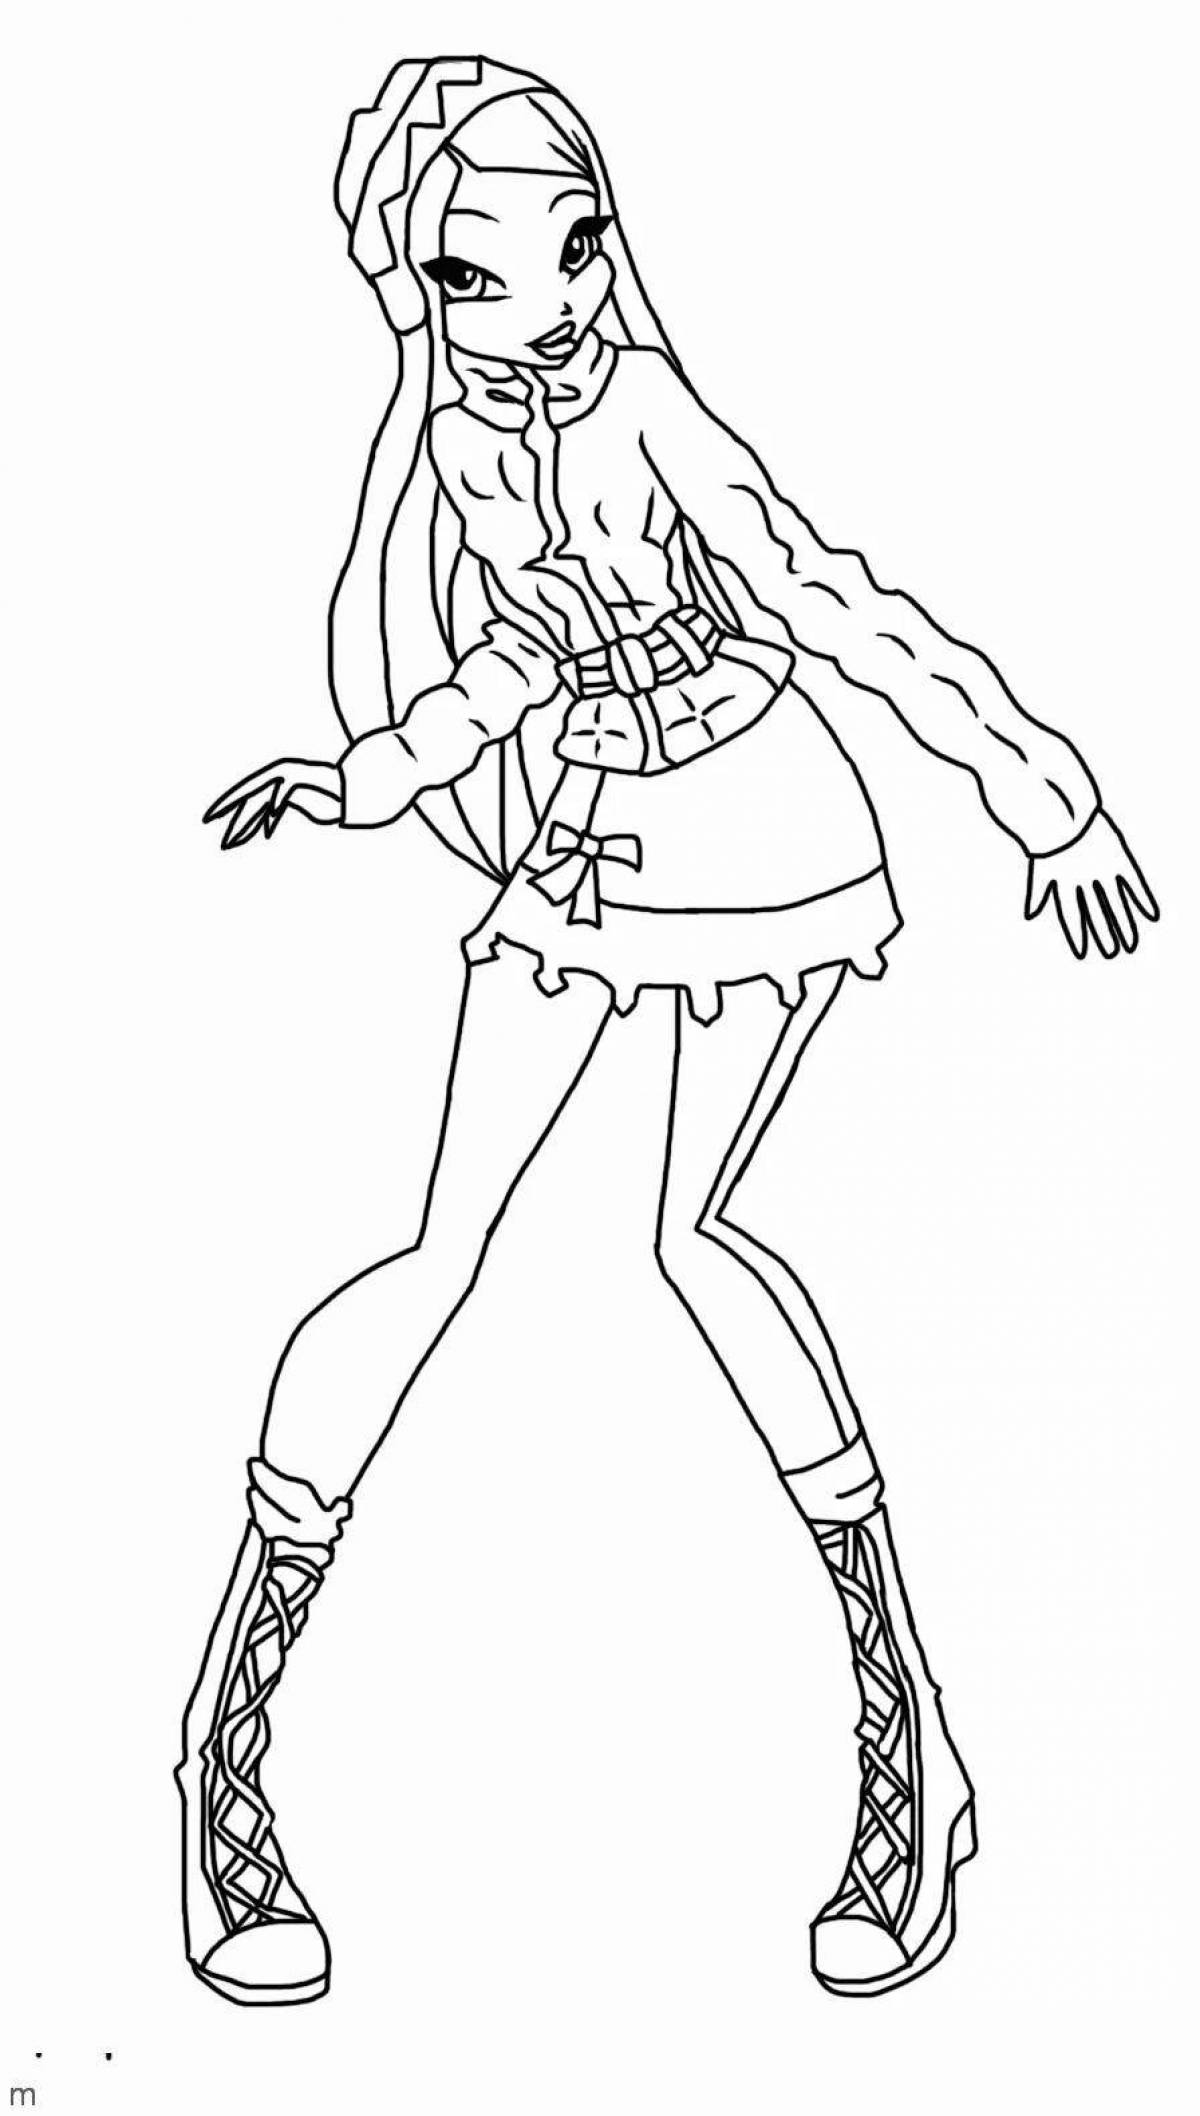 Color-frenzy roxy coloring page